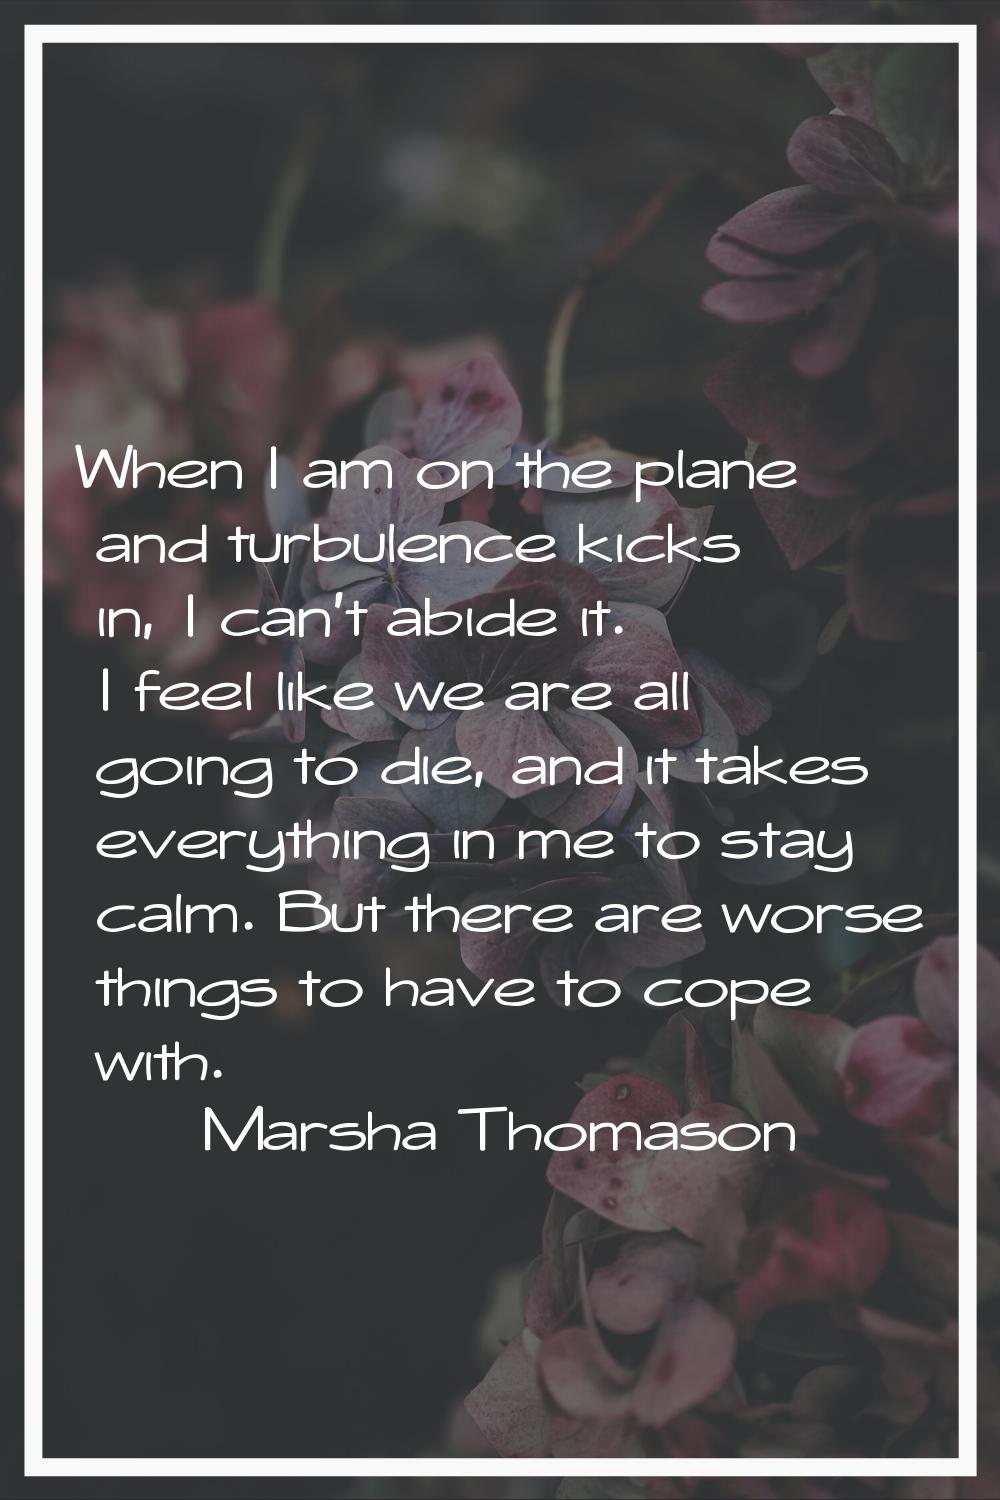 When I am on the plane and turbulence kicks in, I can't abide it. I feel like we are all going to d